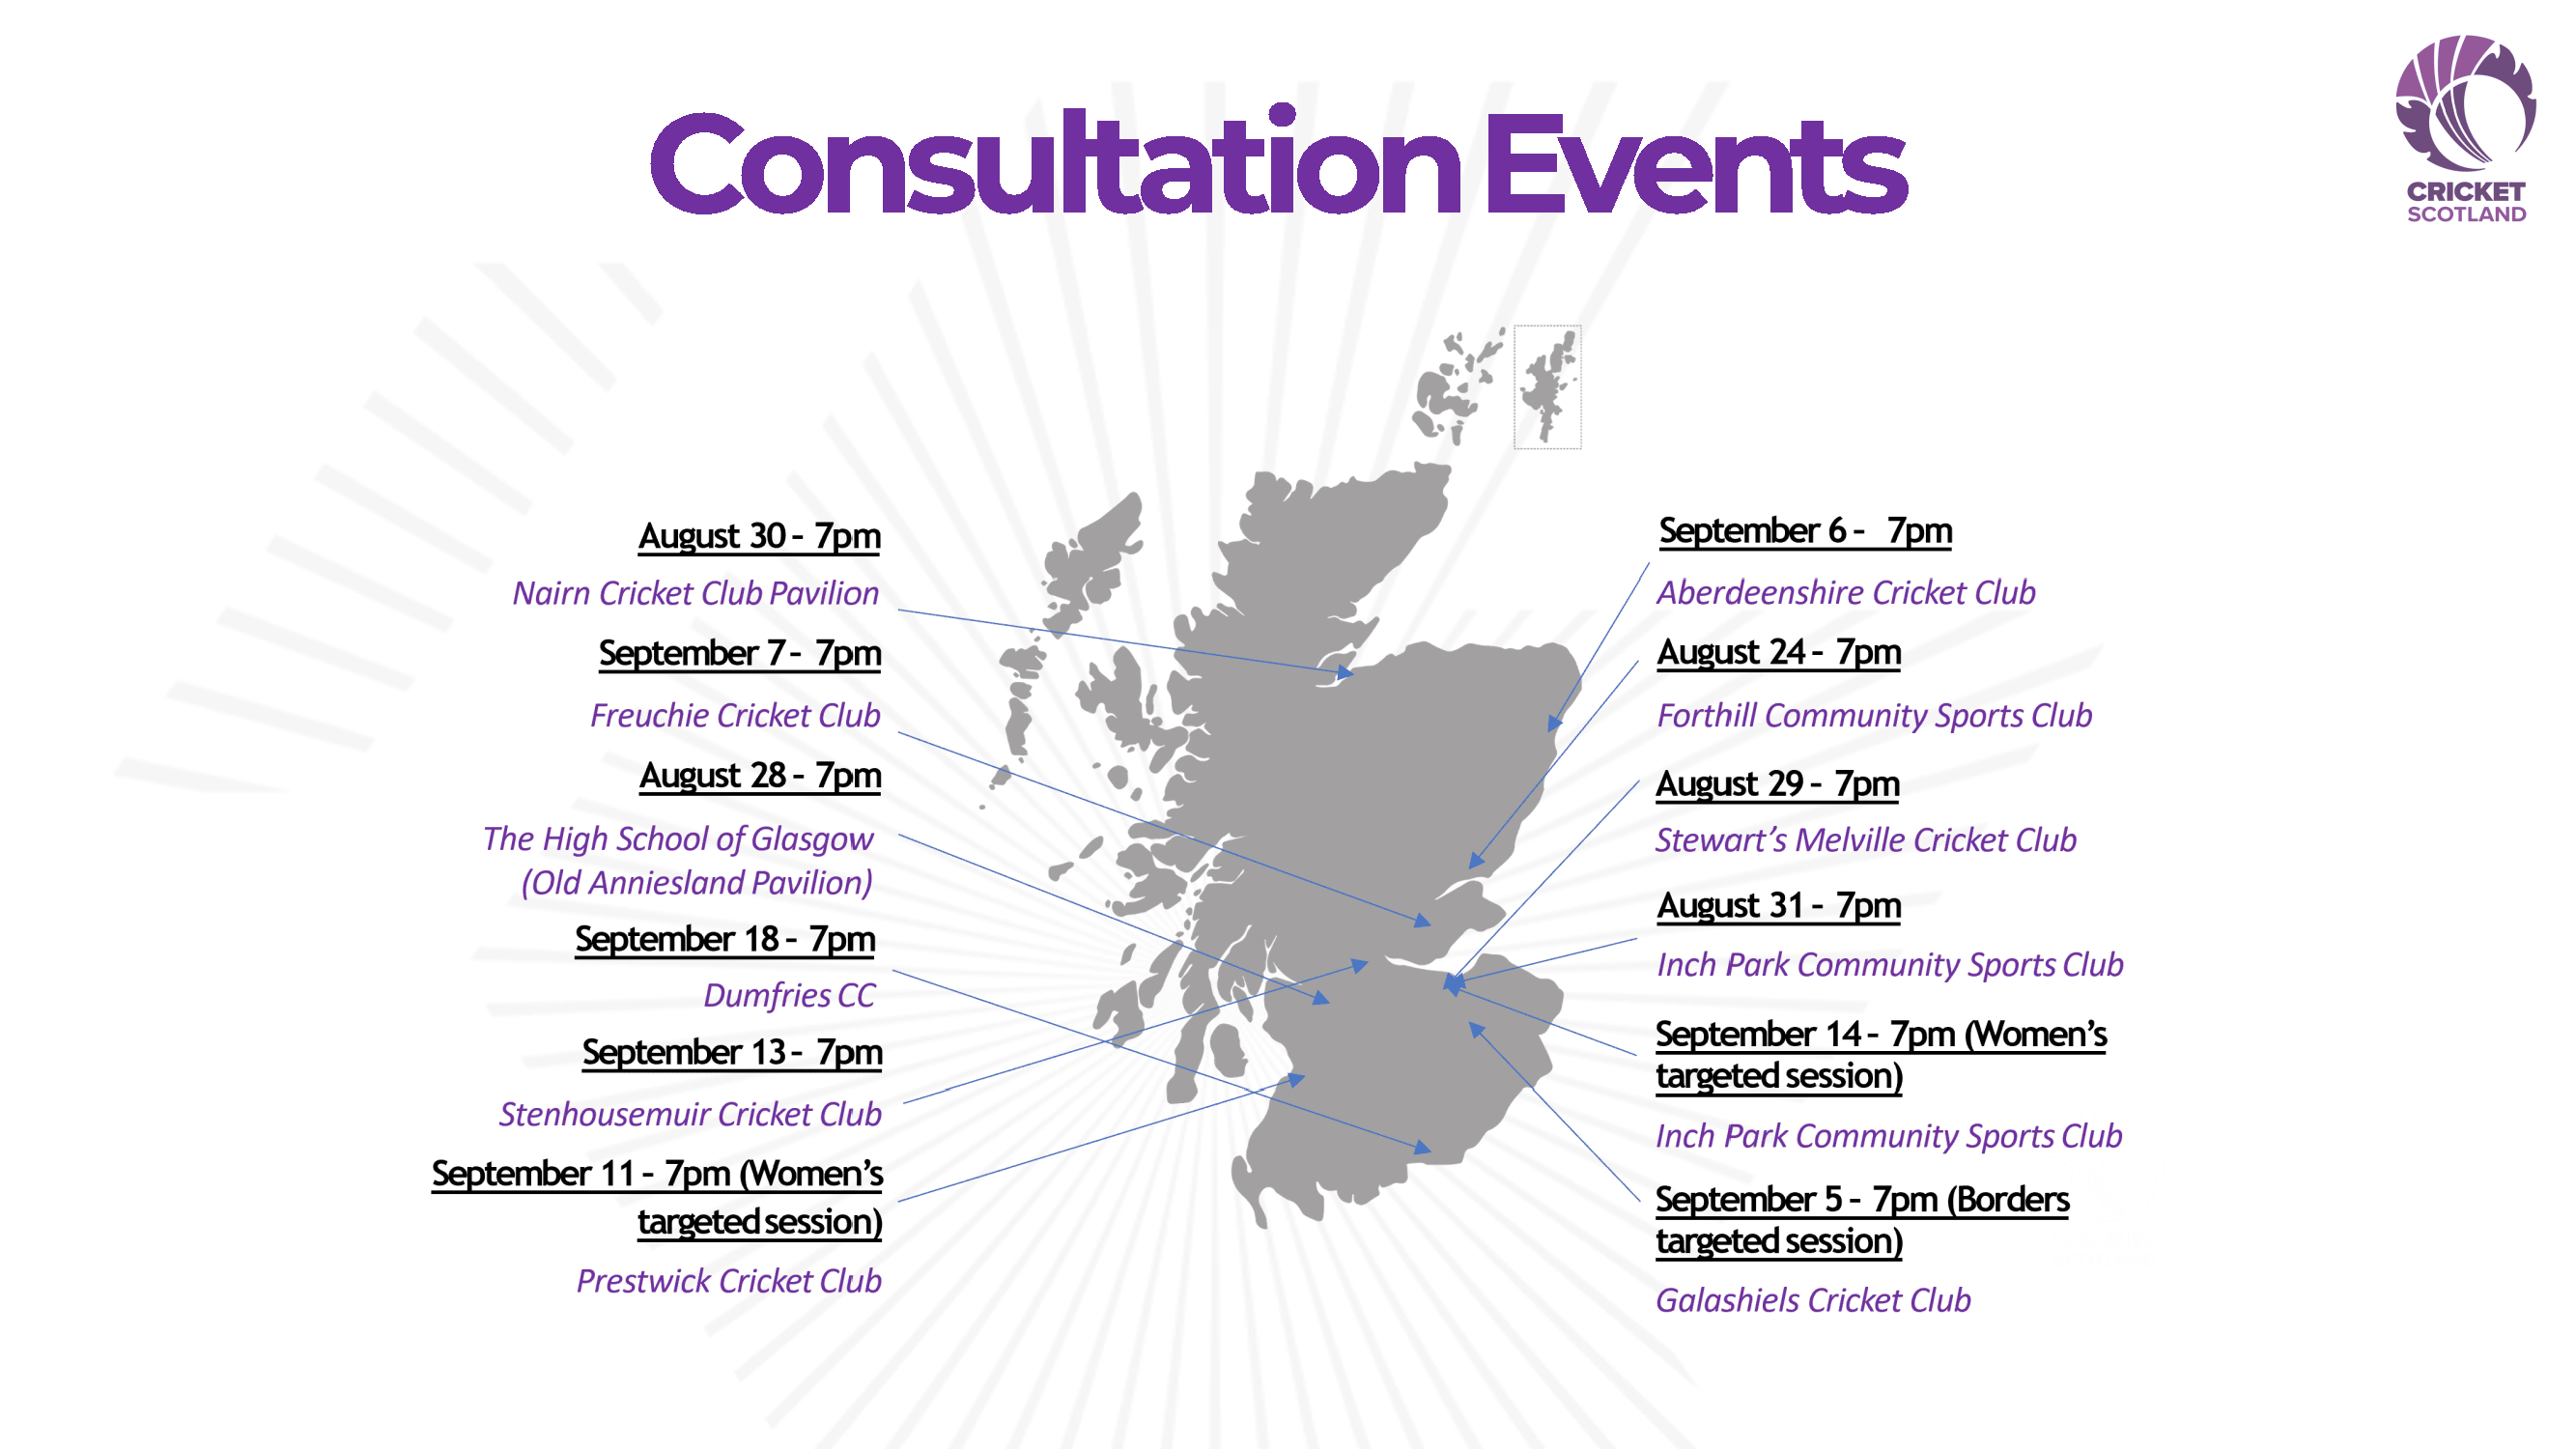 MORE DATES ADDED FOR CRICKET SCOTLAND CONSULTATIONS